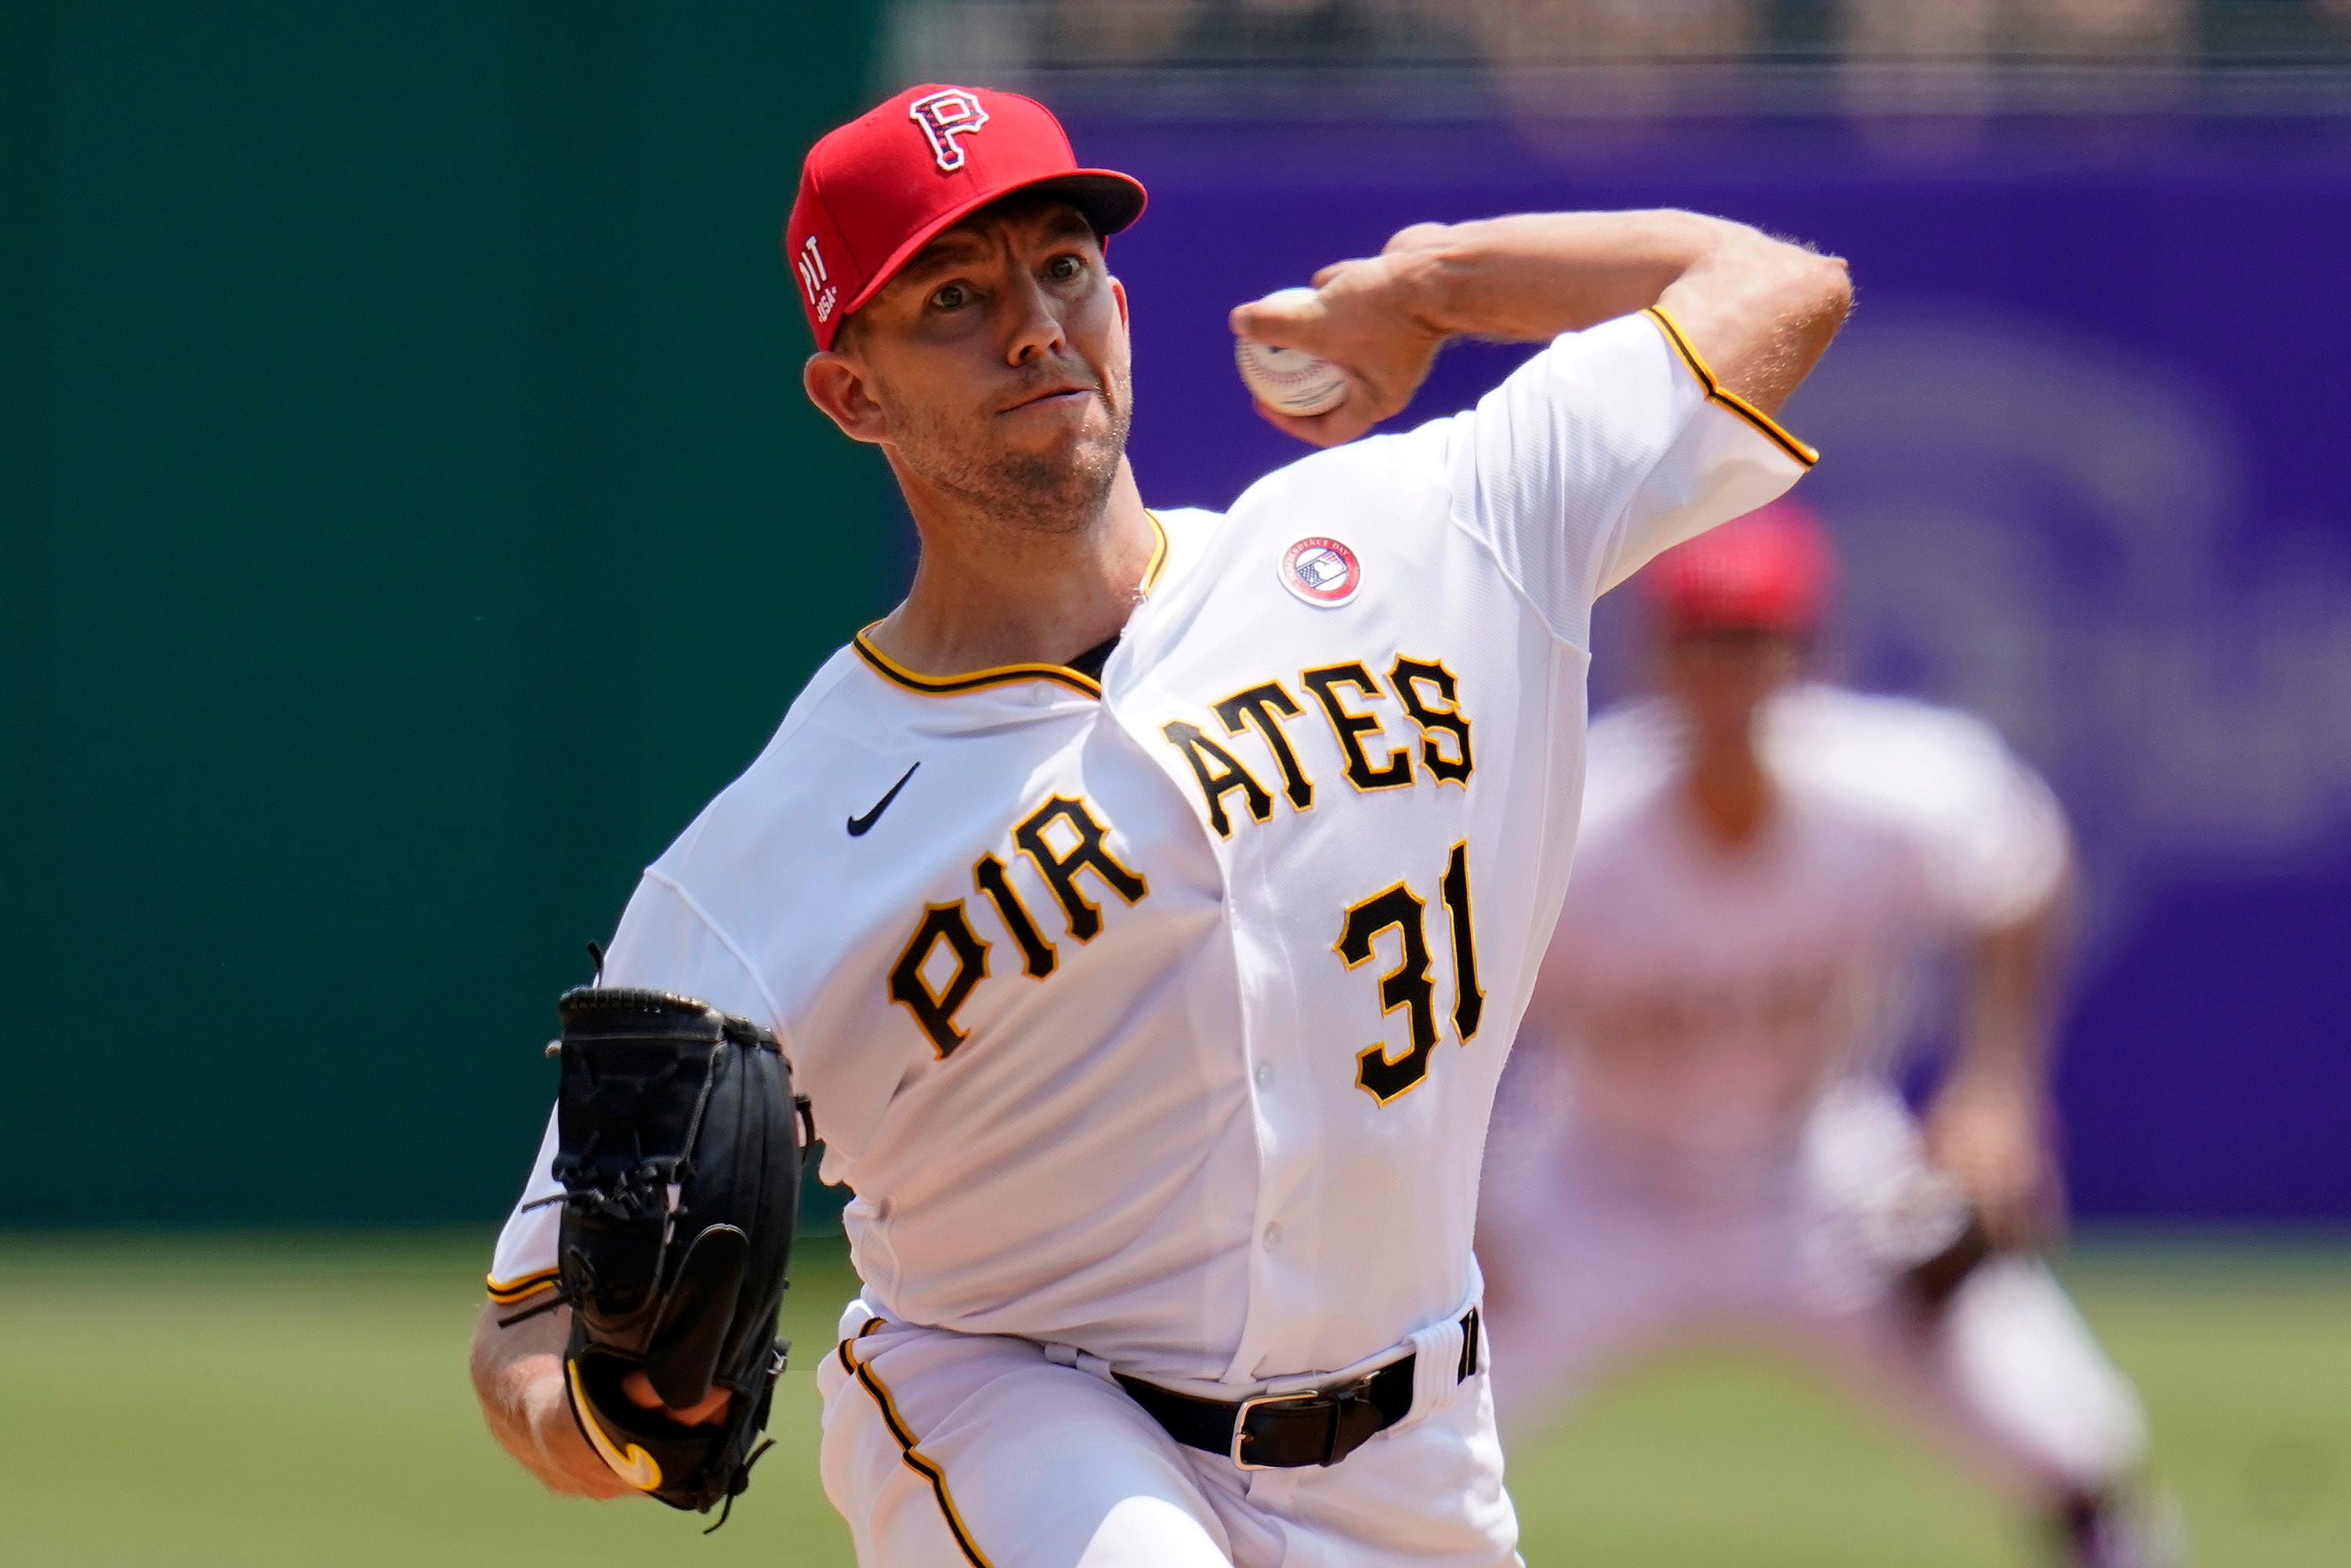 Oviedo pitches 2-hitter for first complete game, leads Pirates